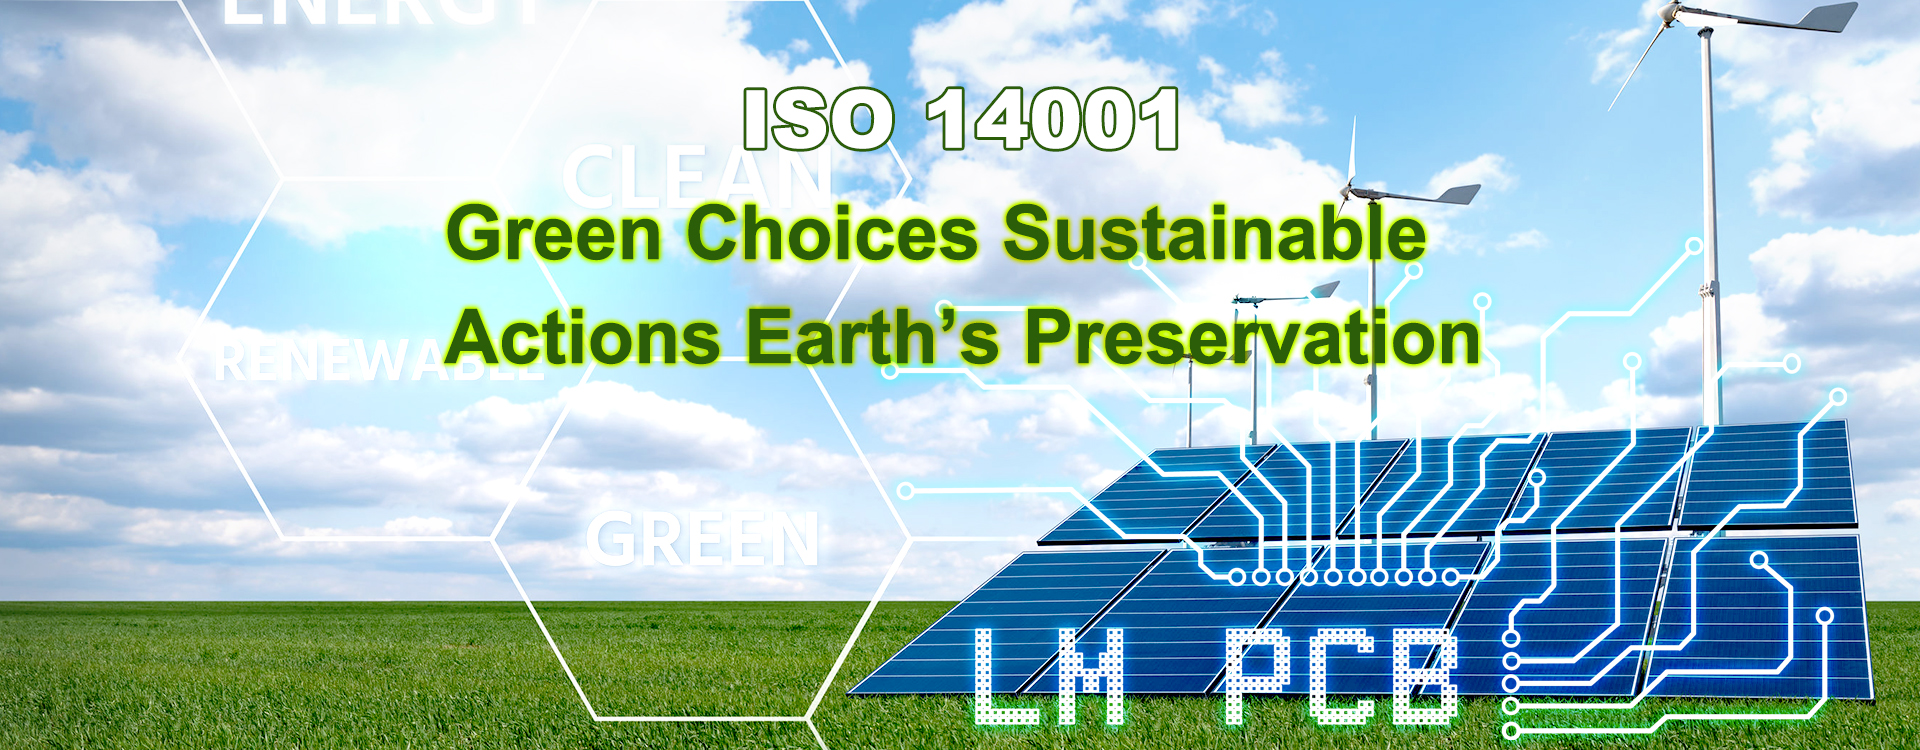 Green Choices Sustainable Actions Earth’s Preservation